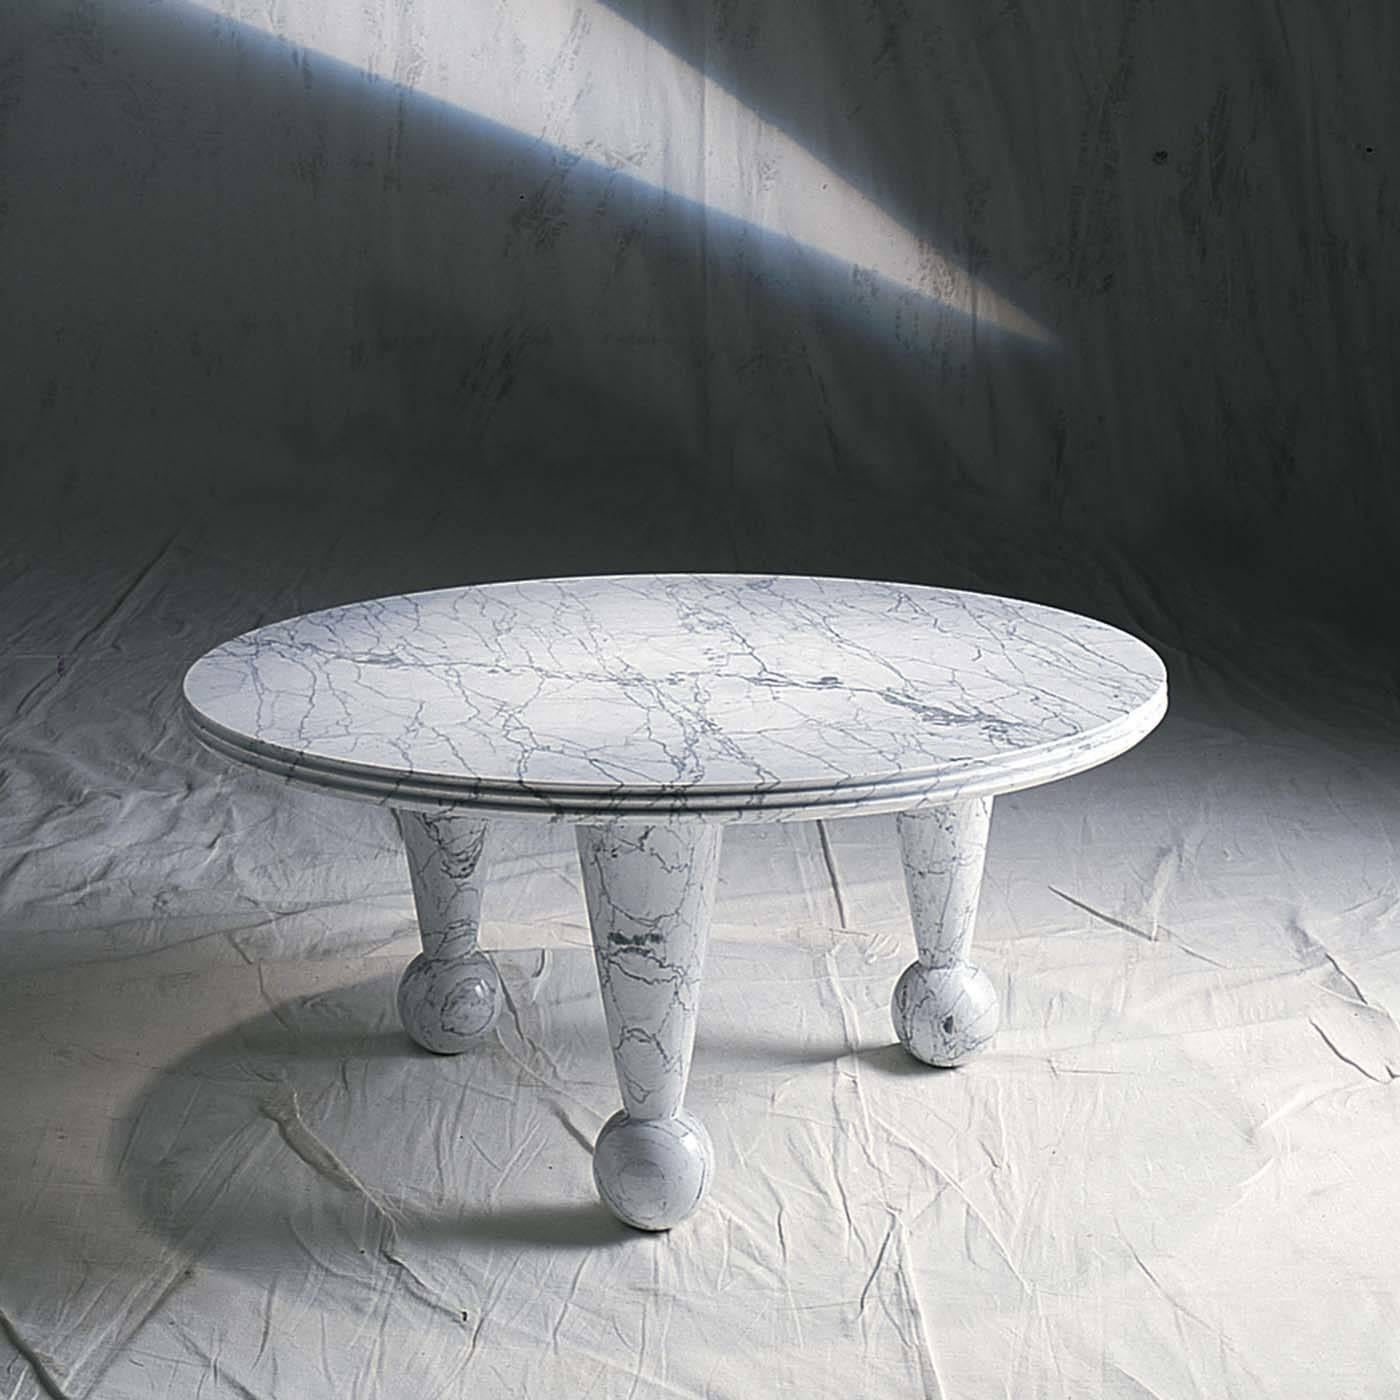 This striking coffee table is a tribute to the noble material of which is made: marble. Designed for UpGroup by Nannetti in 1997, it is a modern and bold table, characterized by merging styles and geometric shapes to create an alluring aesthetic